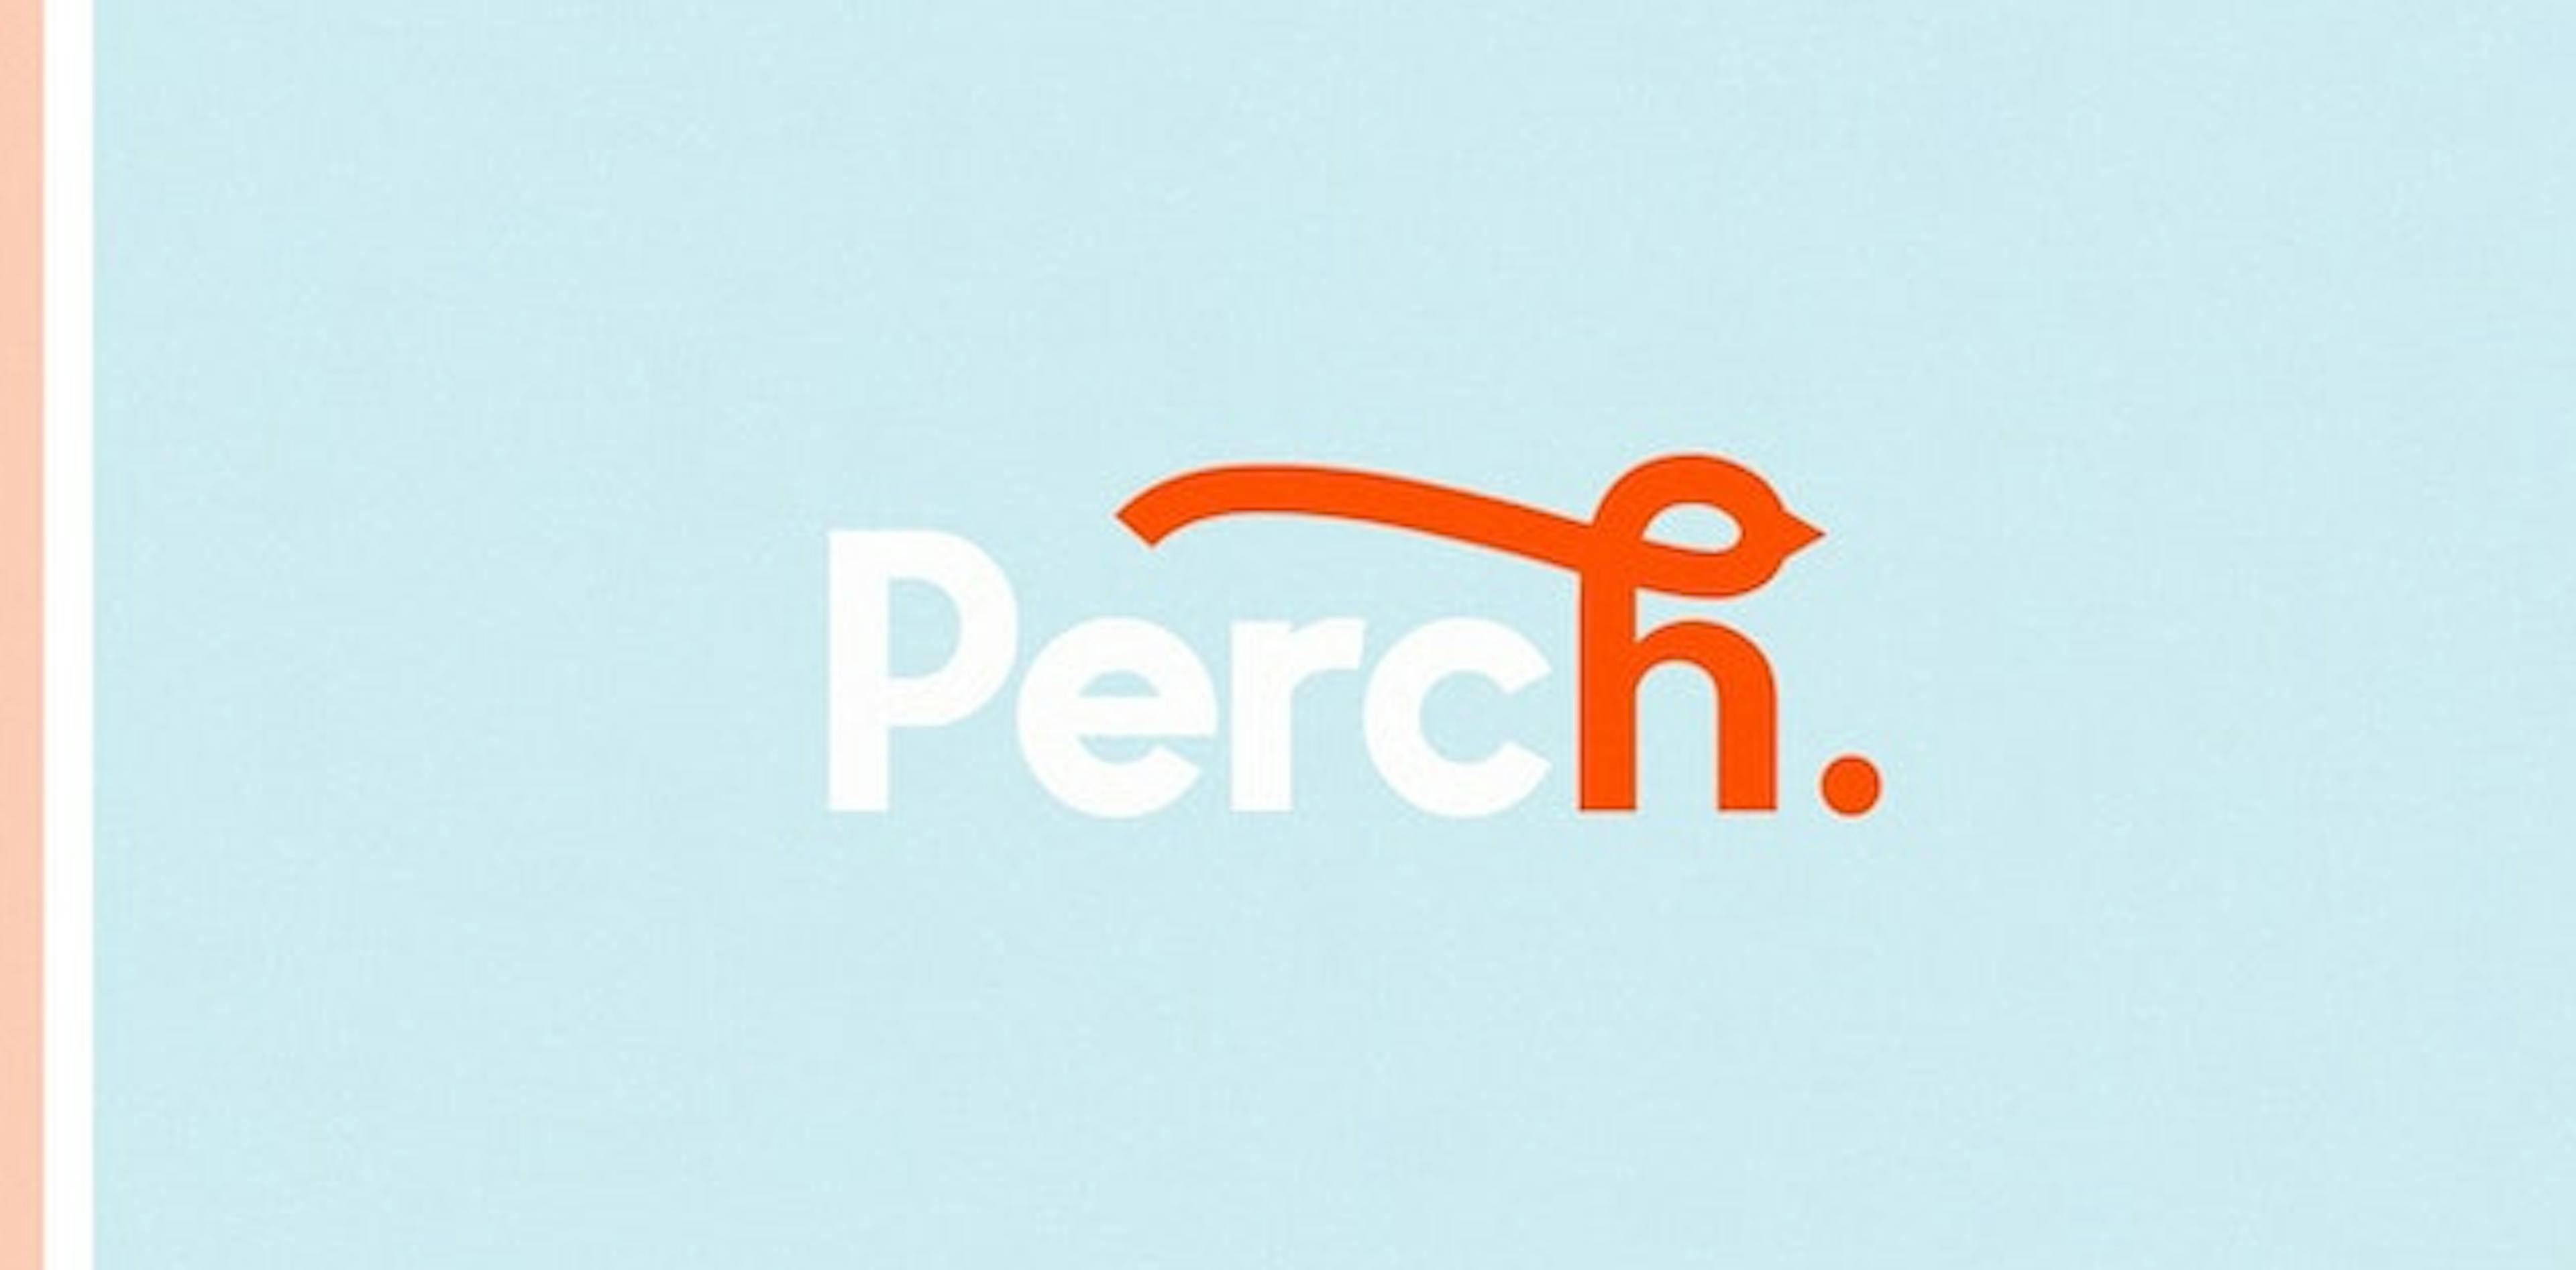 Perch logo is shown taking a prominent spot on each colored background.